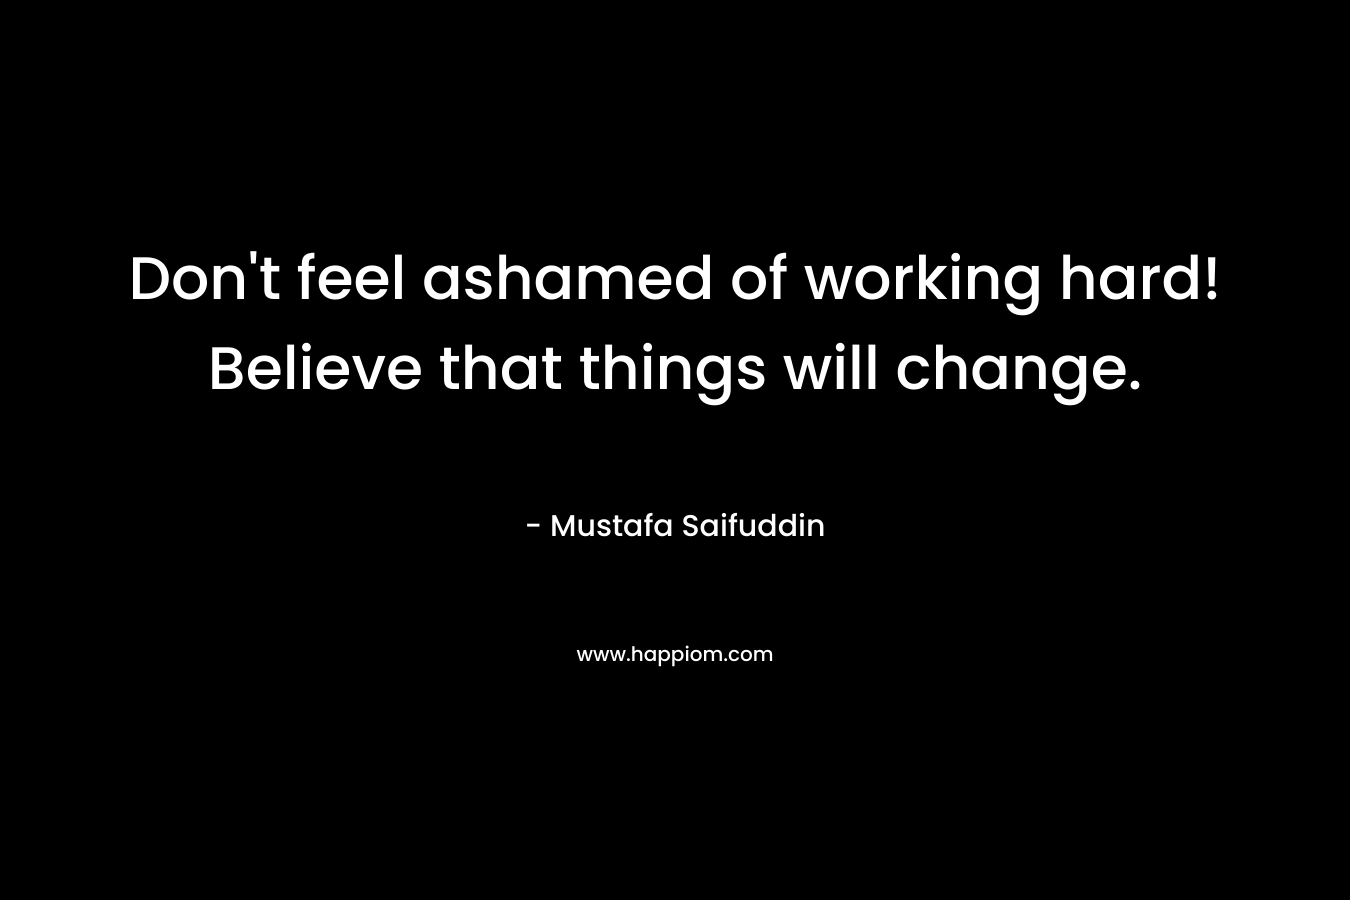 Don't feel ashamed of working hard! Believe that things will change.